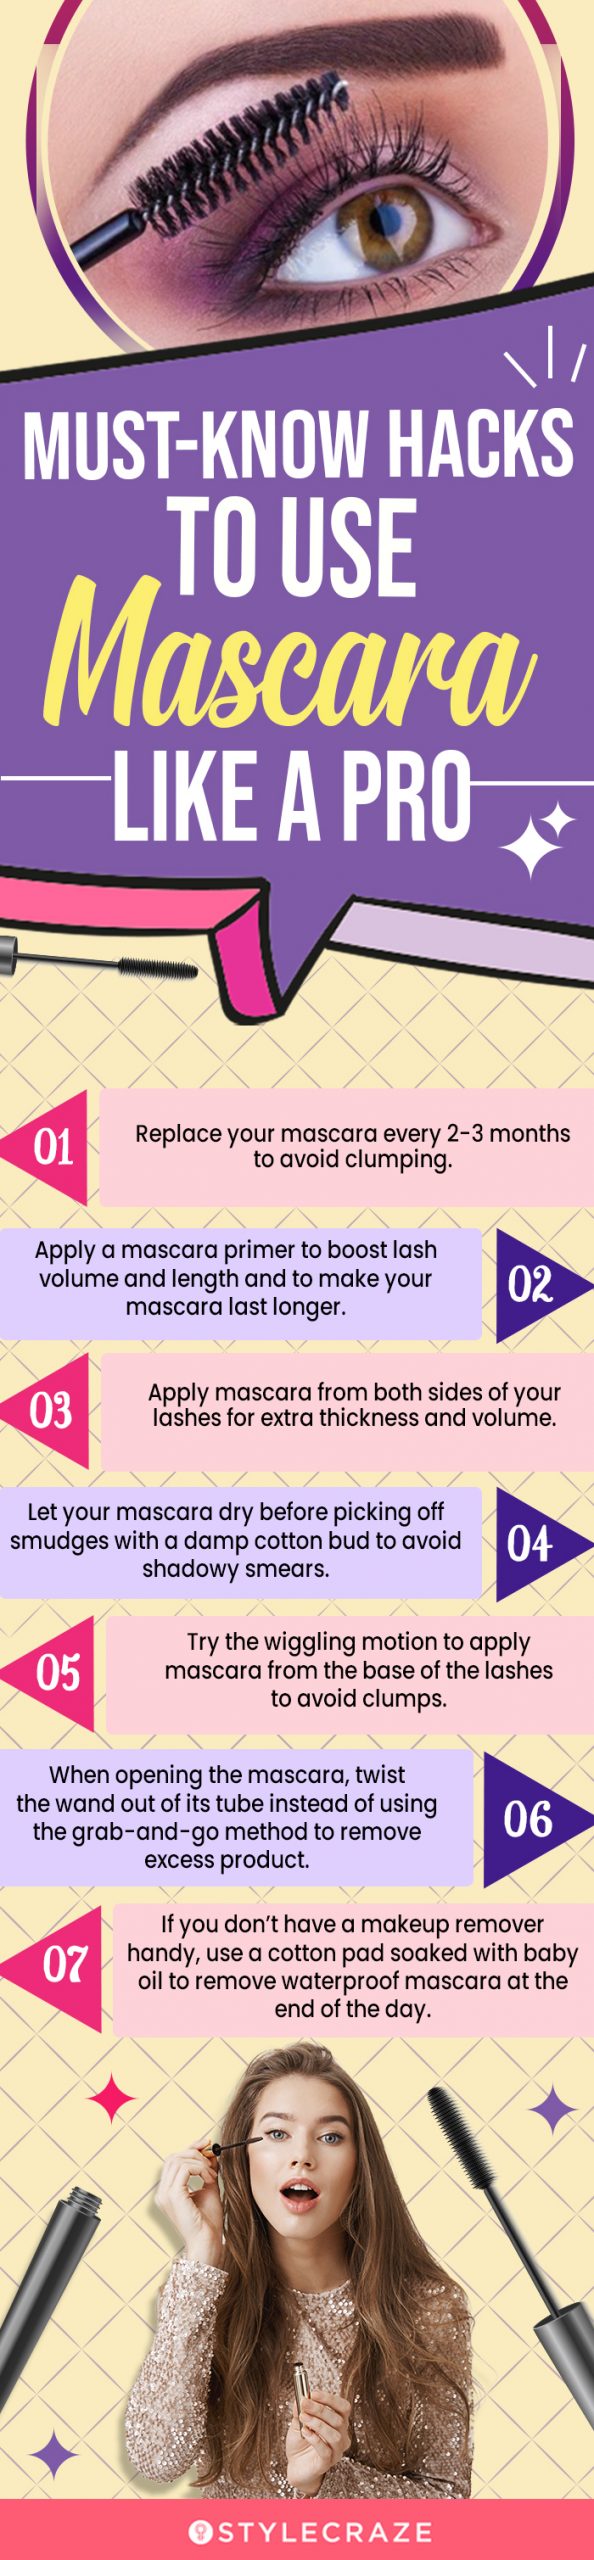 Must-Know Hacks To Use Mascara Like A Pro (infographic)